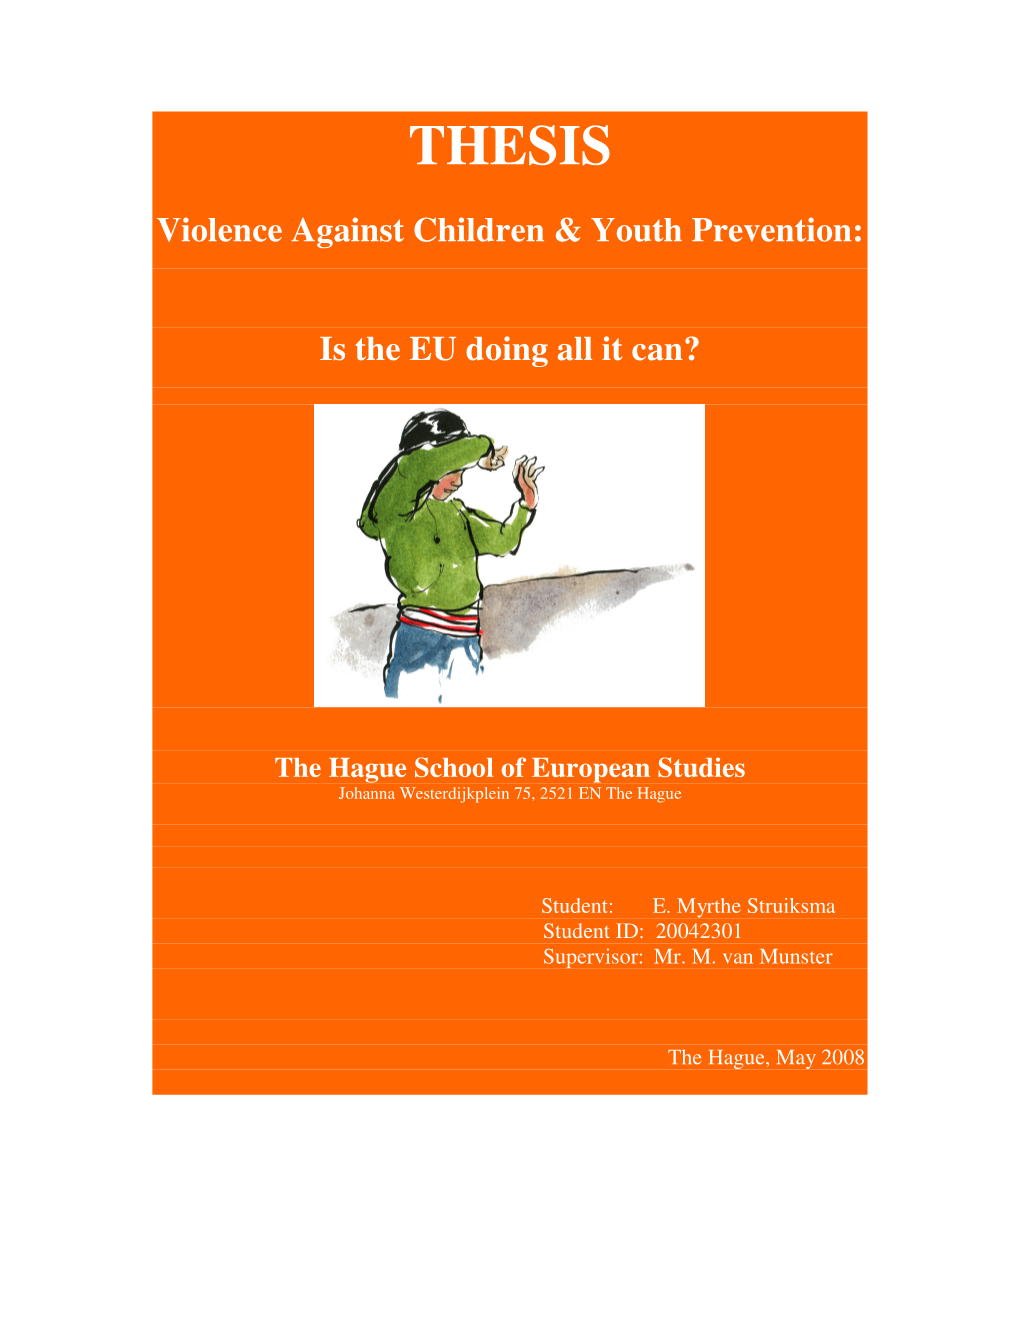 THESIS Violence Against Children & Youth Prevention